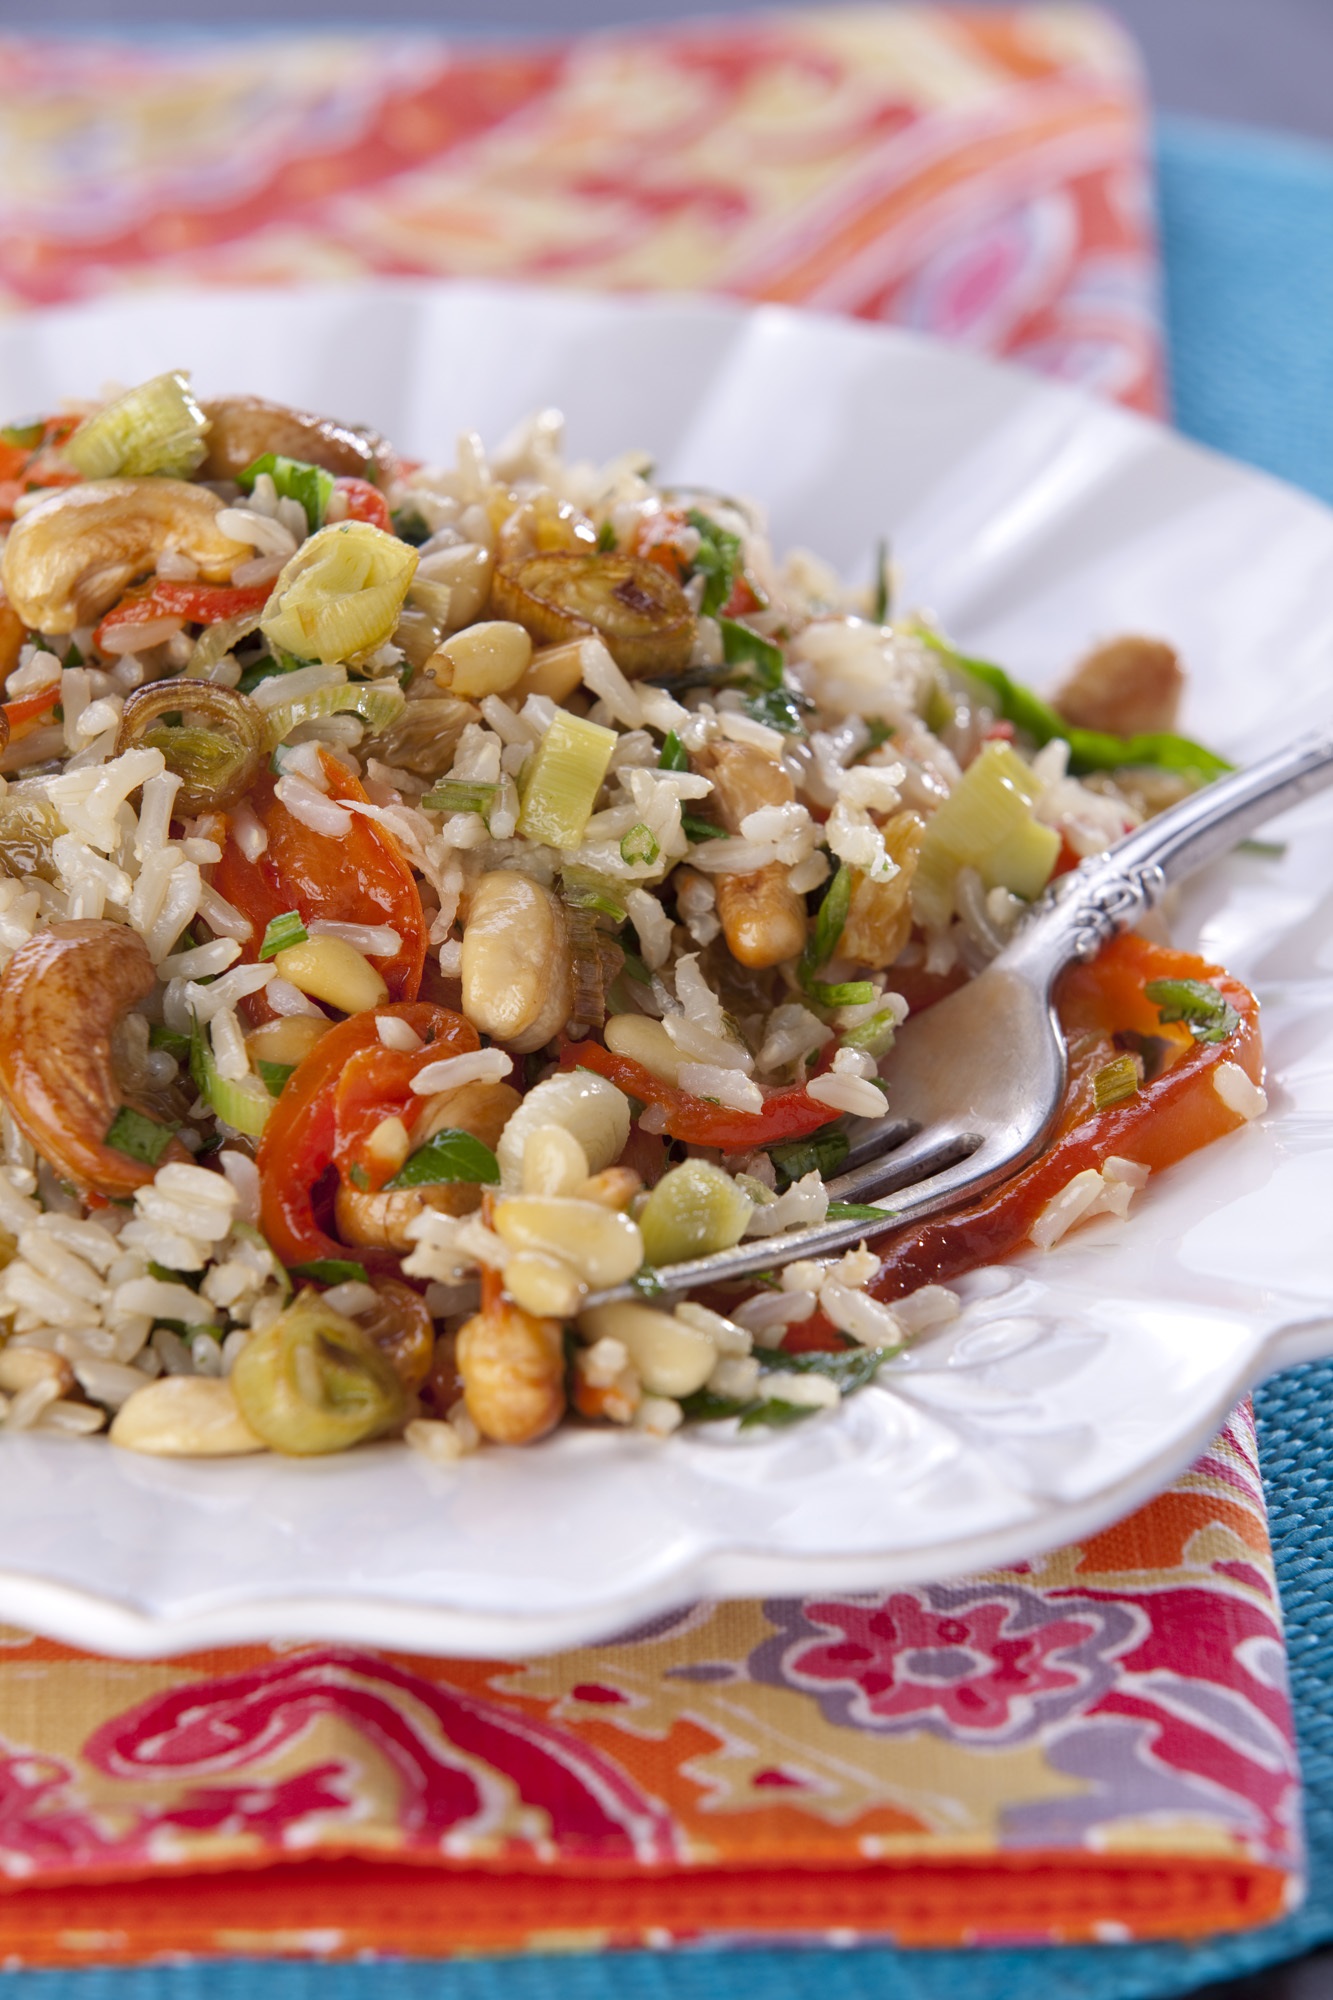 Nutty Brown Rice salad with Haloumi Cheese and Herbs